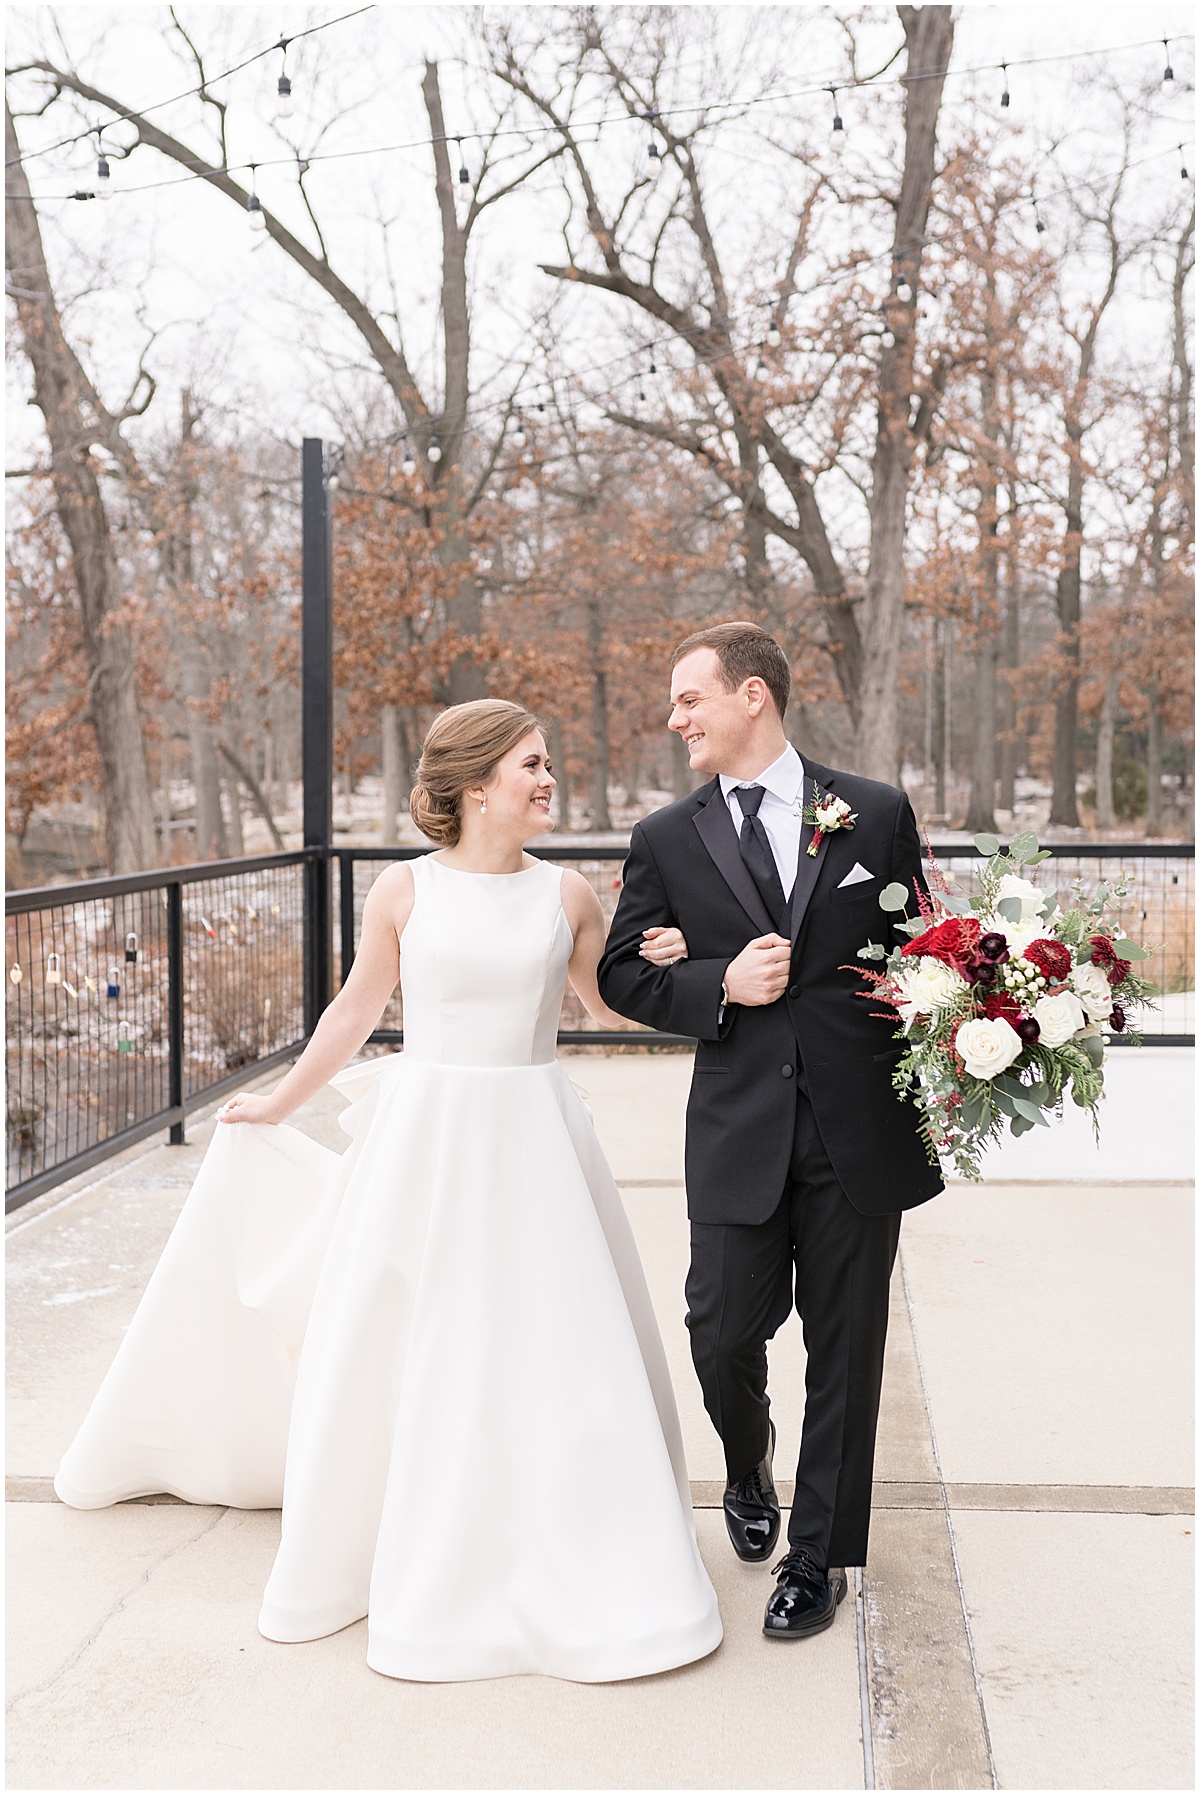 Bride and groom walk outside after Allure on the Lake wedding in Chesterton, Indiana photographed by Victoria Rayburn Photography